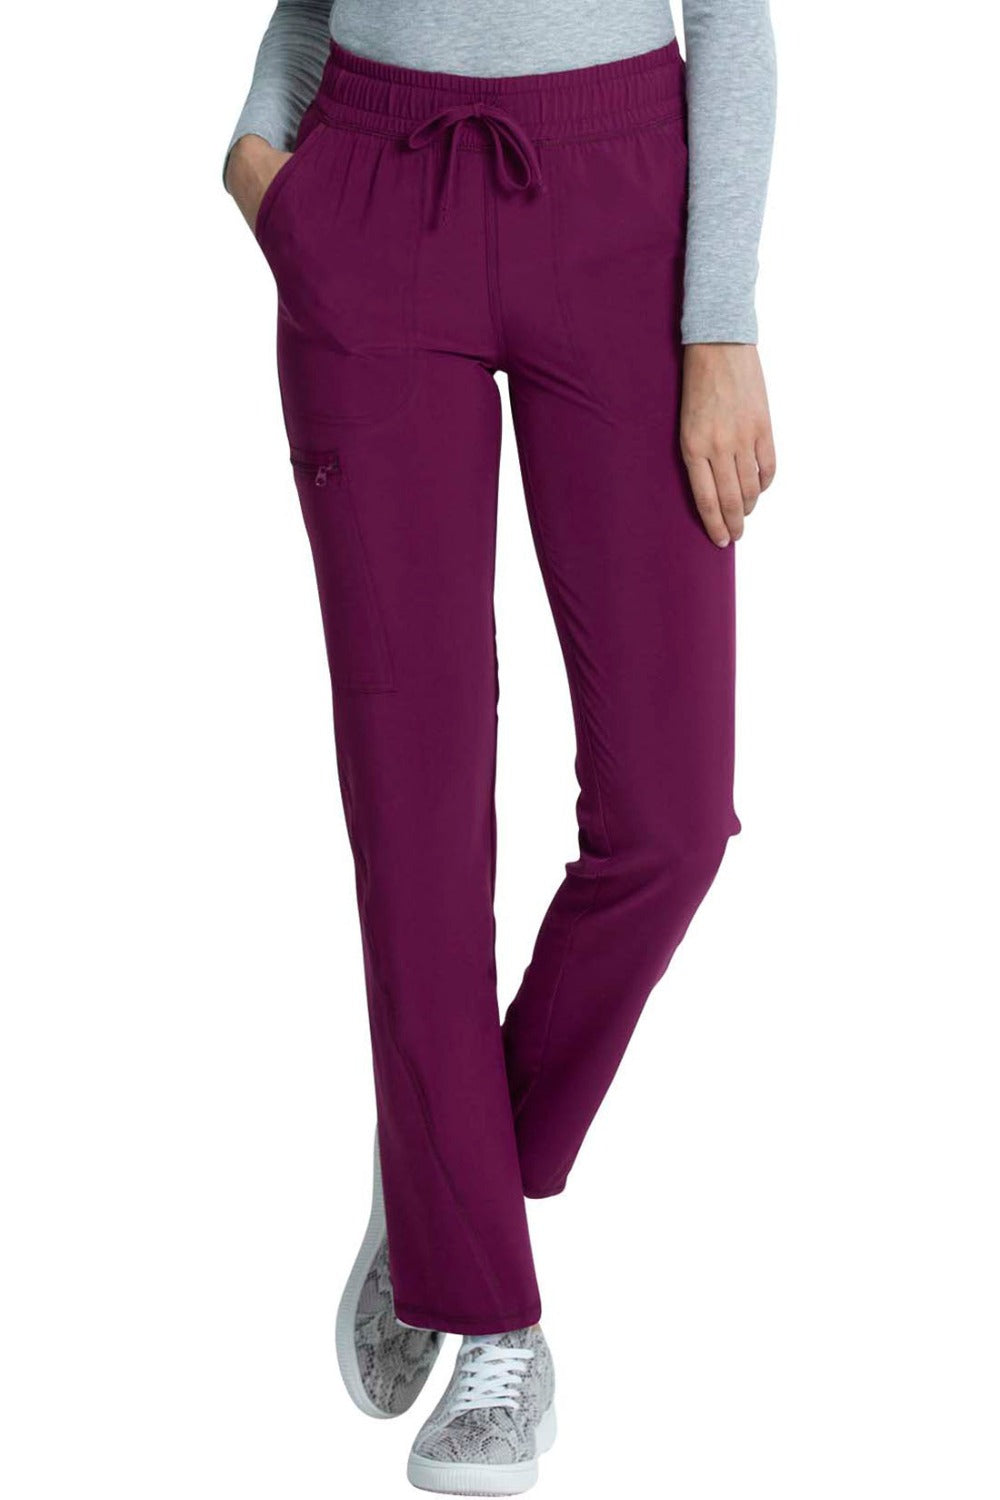 Cherokee Allura Scrub Pant Mid Rise Tapered Leg Drawstring in Wine at Parker's Clothing and Shoes.